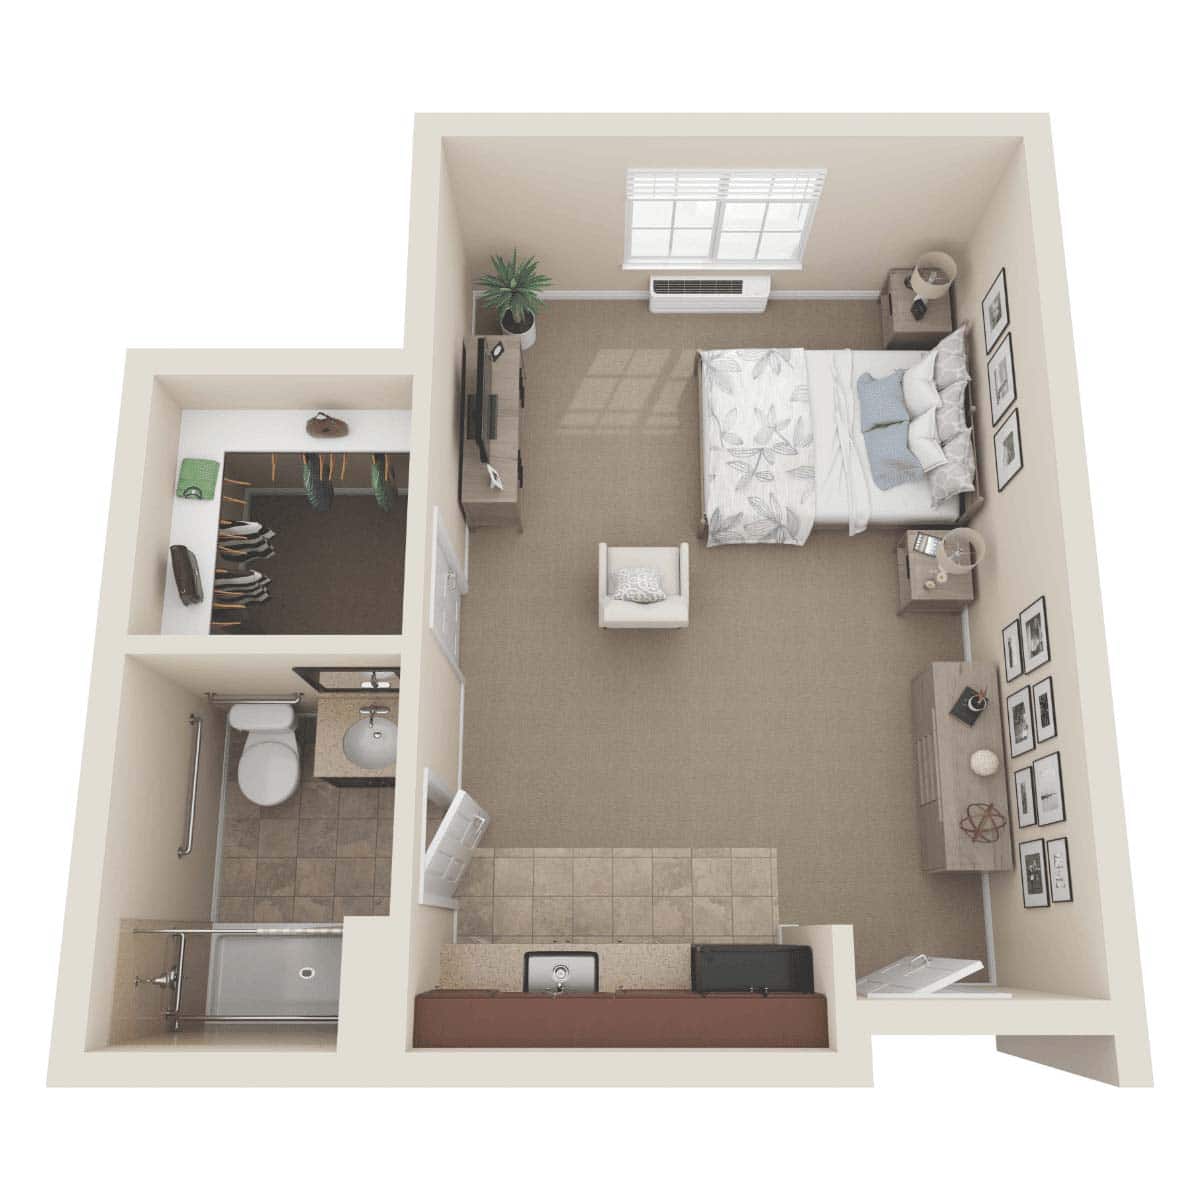 Capitol Hill Assisted Living & Memory Care - Studio Floor Plan